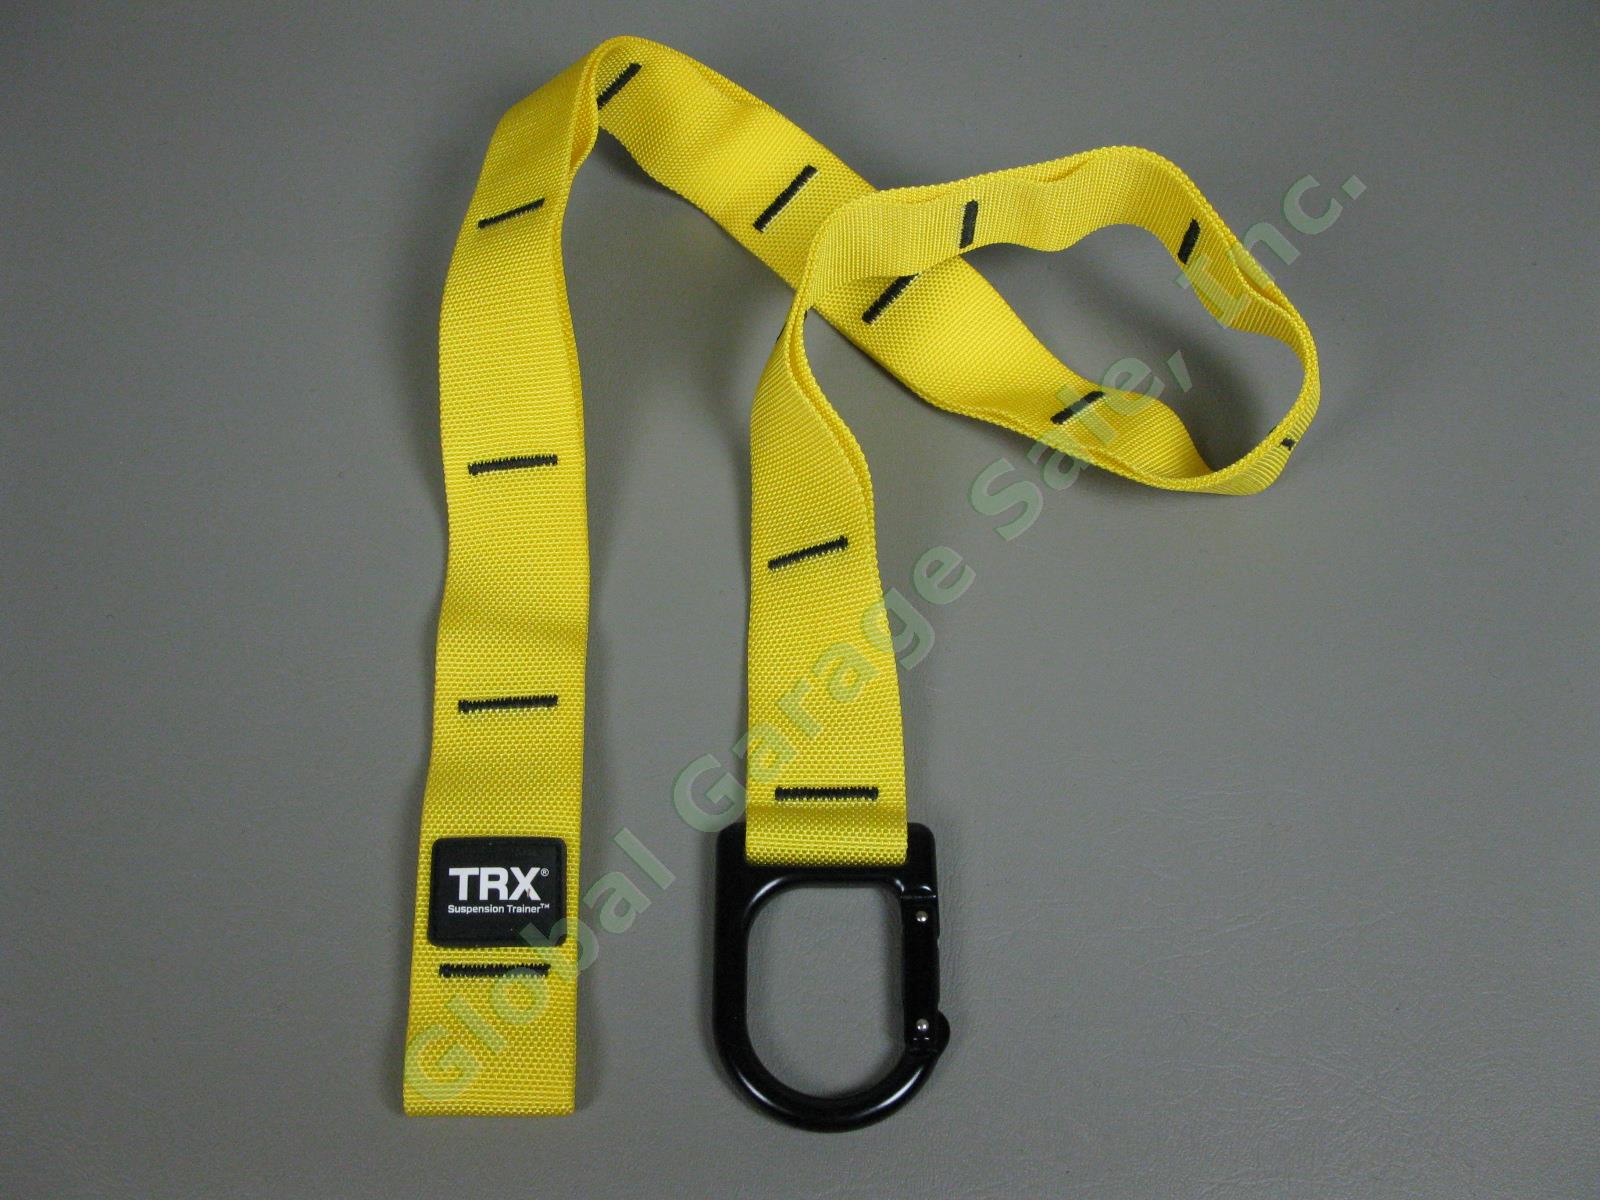 TRX Suspension Trainer Exercise Full Body Strength Gym Training System Workout 6